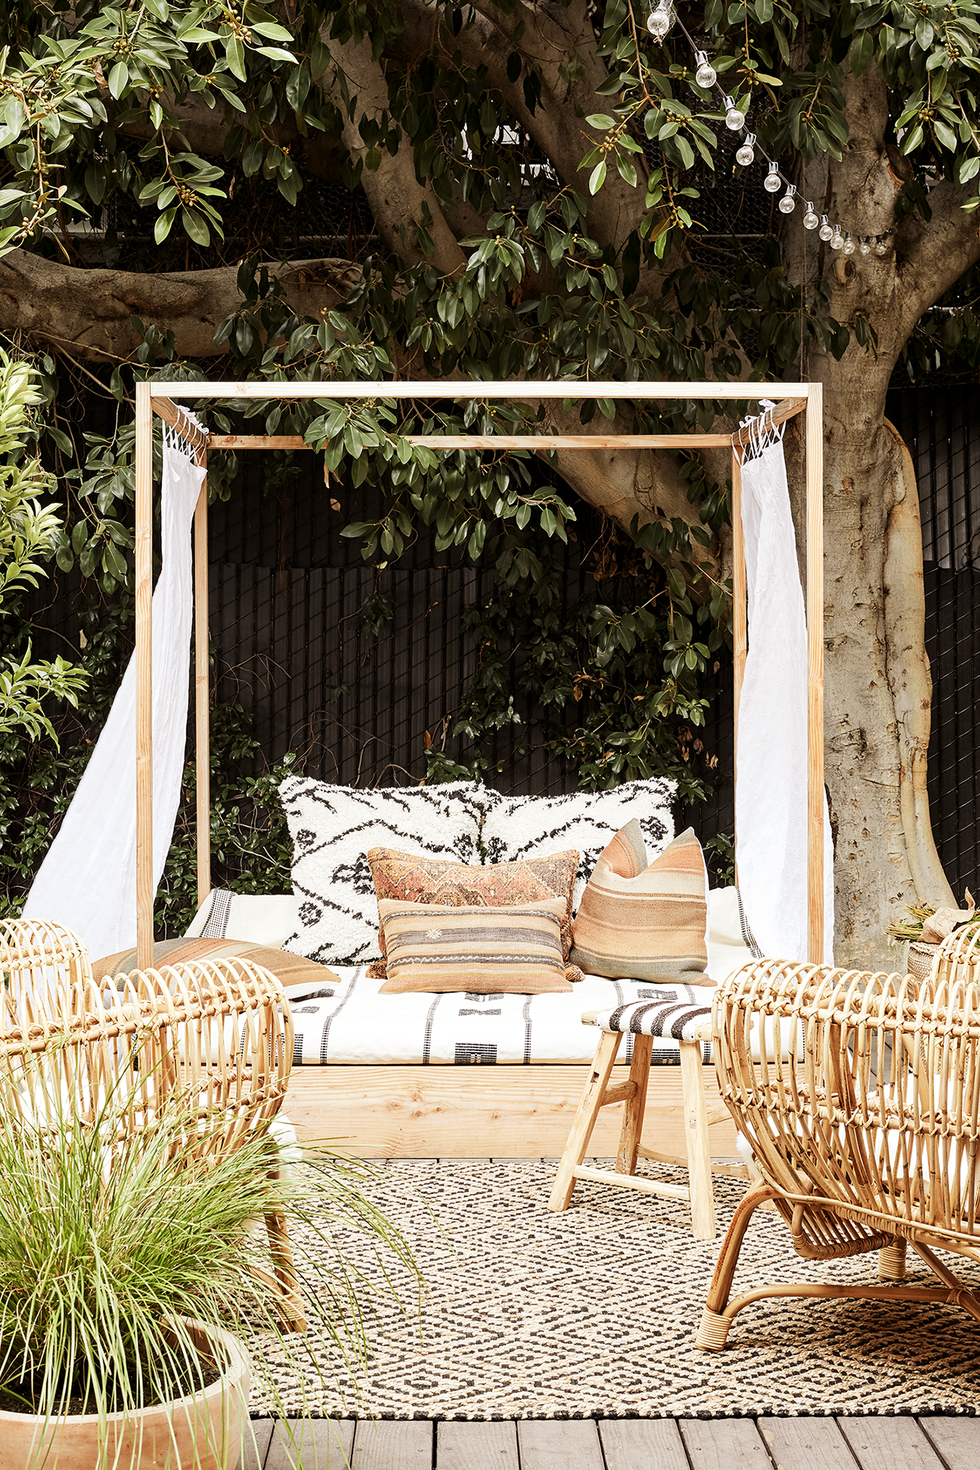 55 Unique Backyard Decor Ideas To Try On A Budget